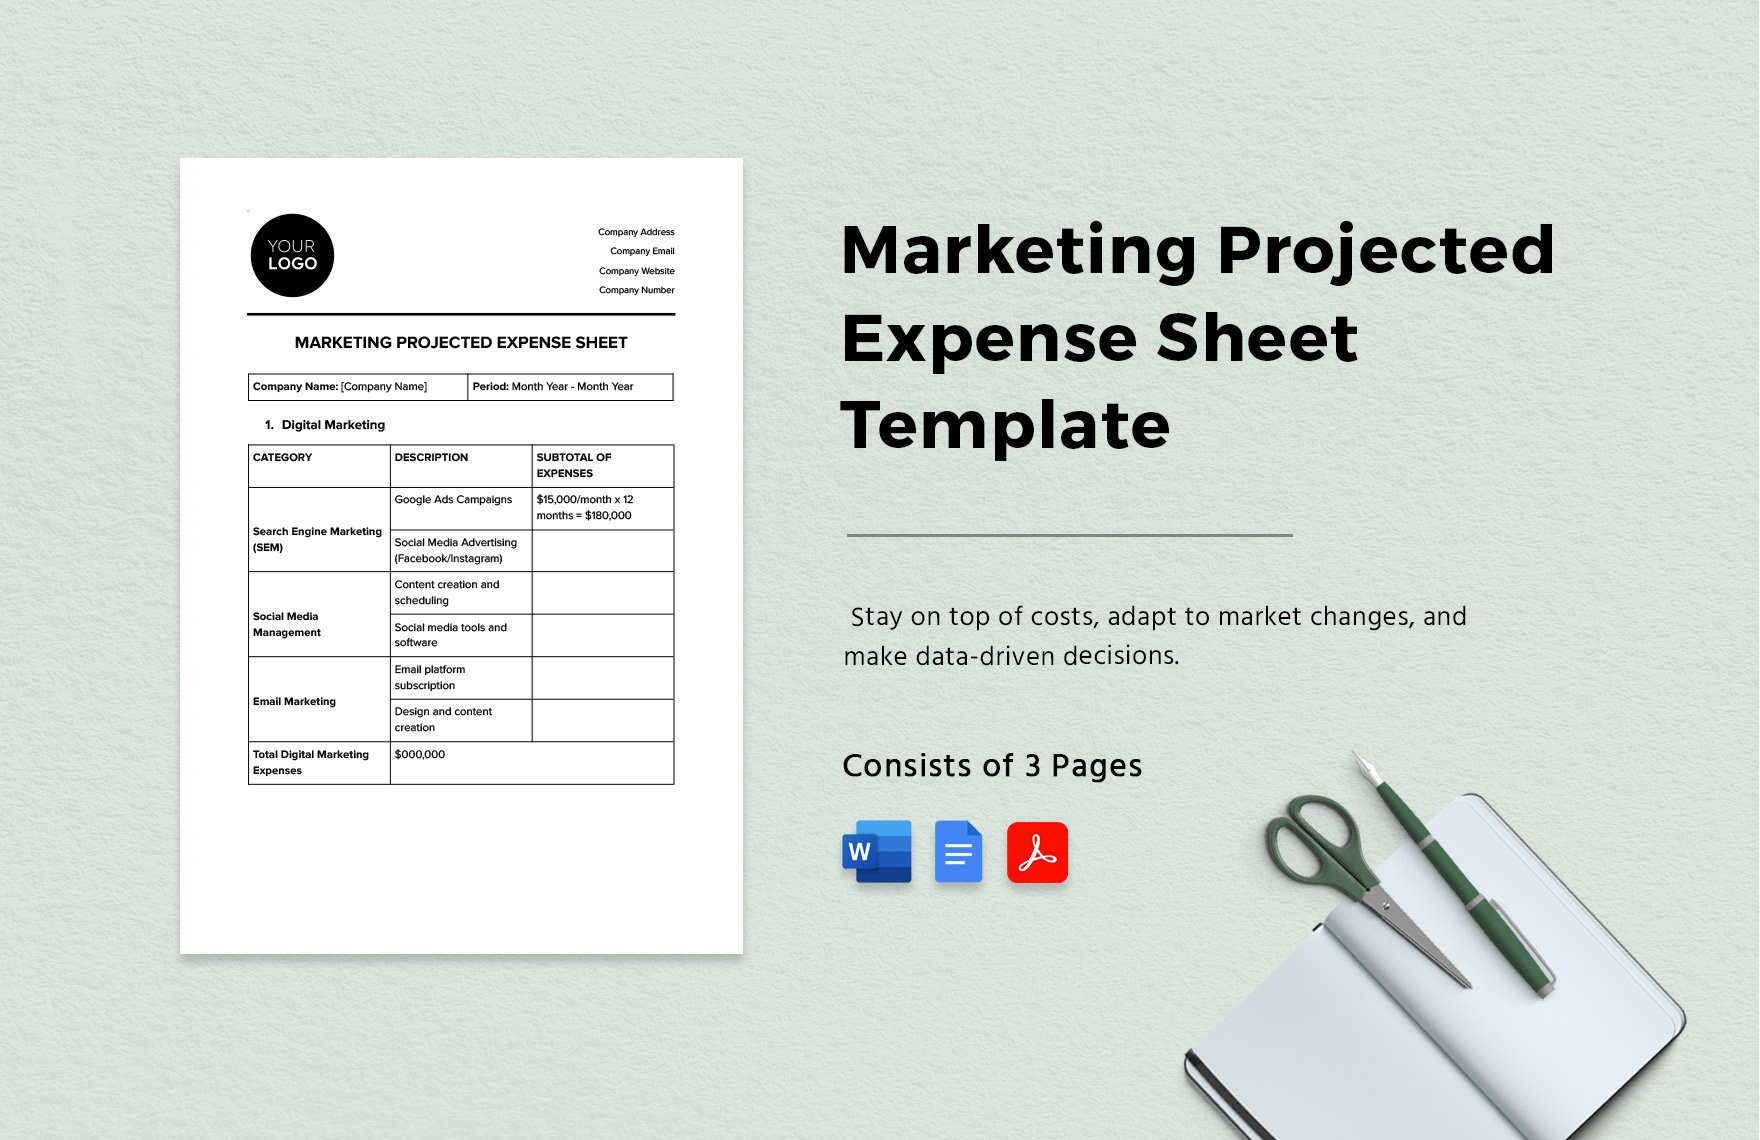 Marketing Projected Expense Sheet Template